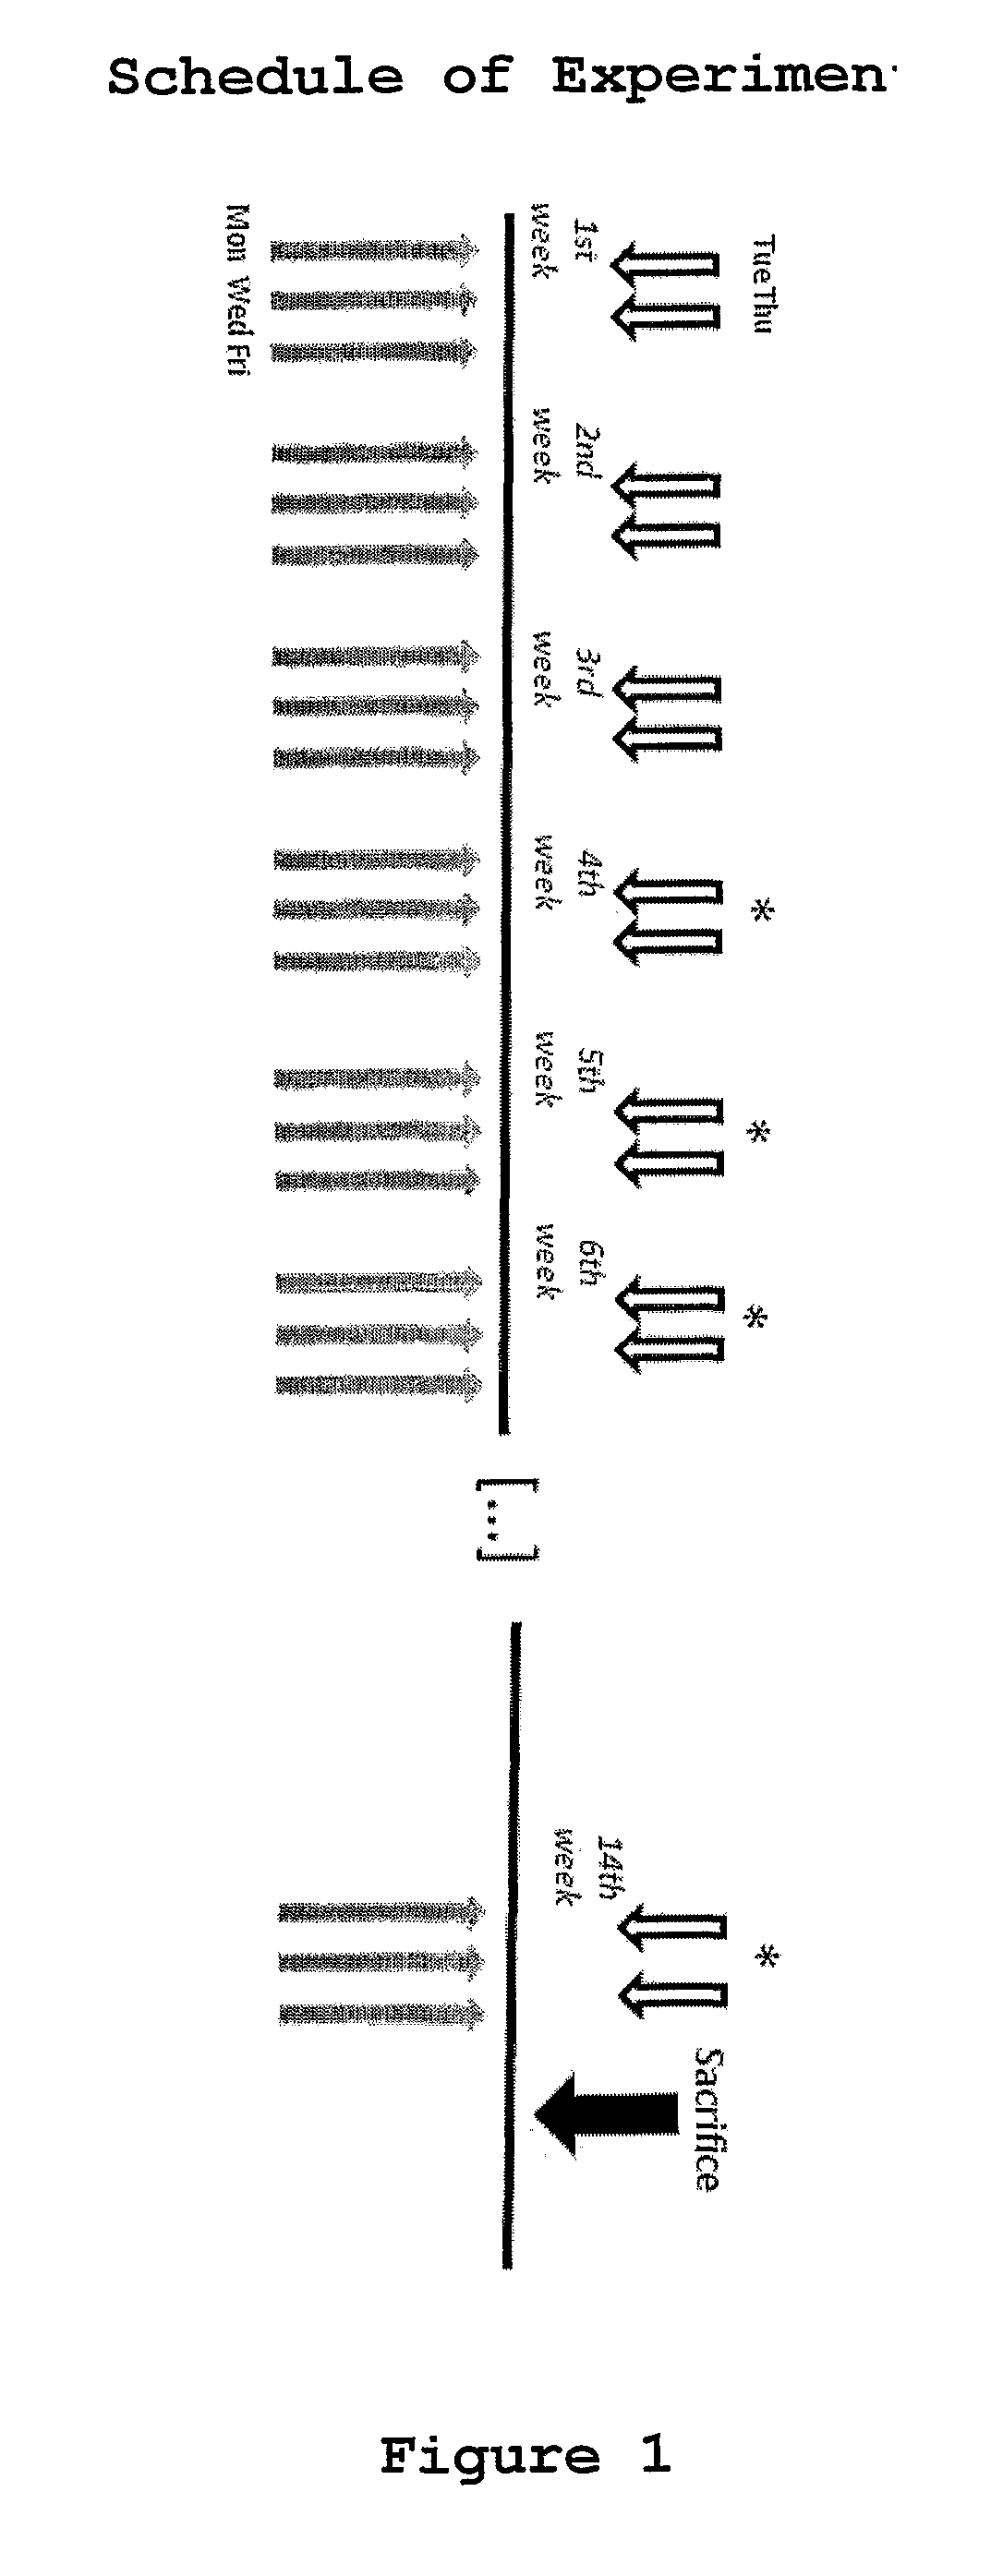 Formulations with Anti-neoplastic activity